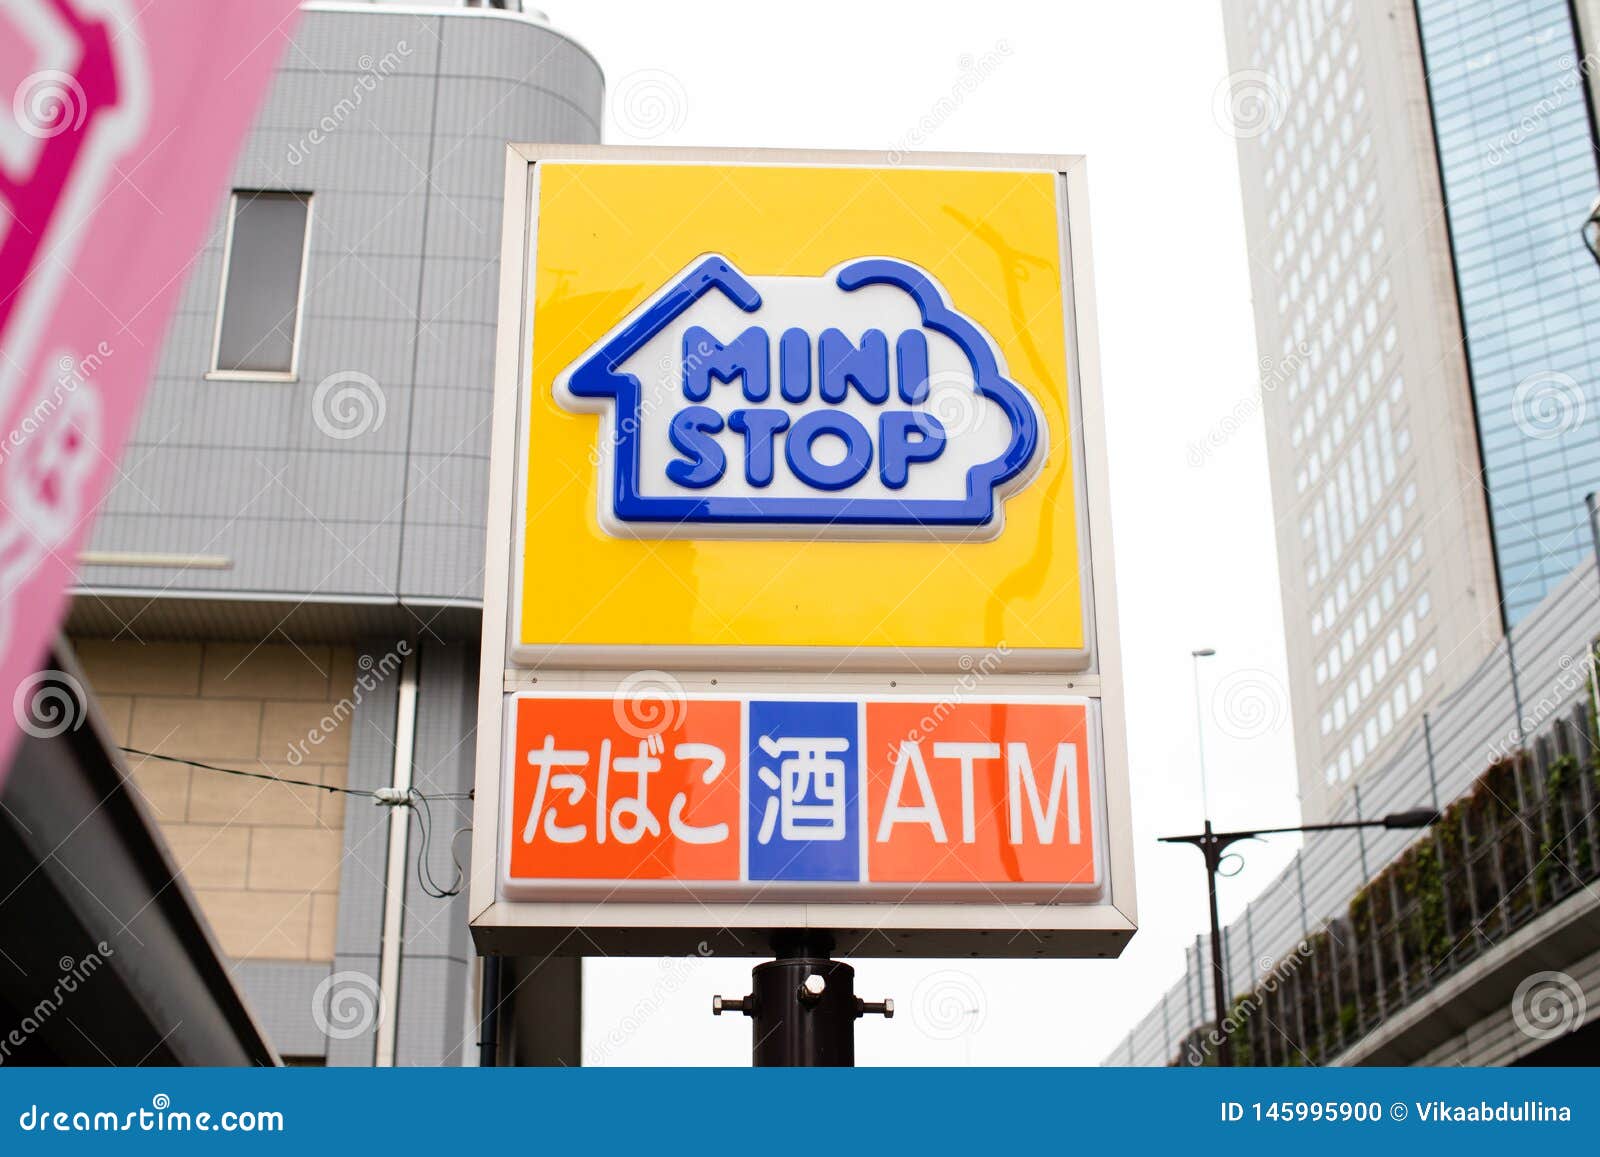 Ministop Co Ltd A Member Of Aeon Aeon Operates The Ministop Convenience Store Combin Editorial Image Image Of Lunch Lawson